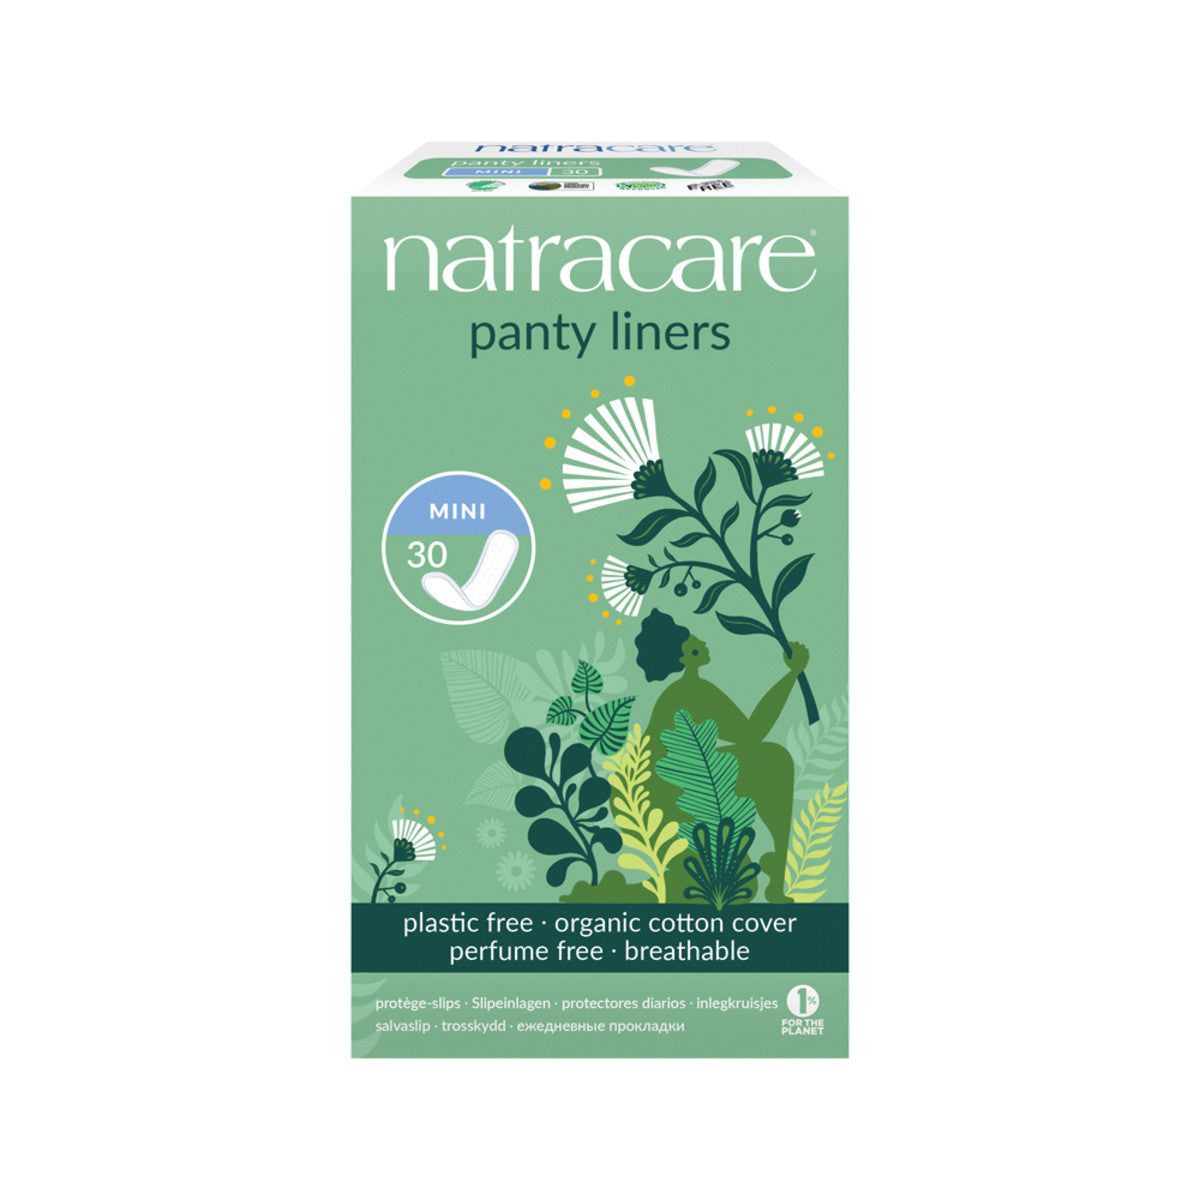 Natracare - Panty Liners Mini with Organic Cotton Cover